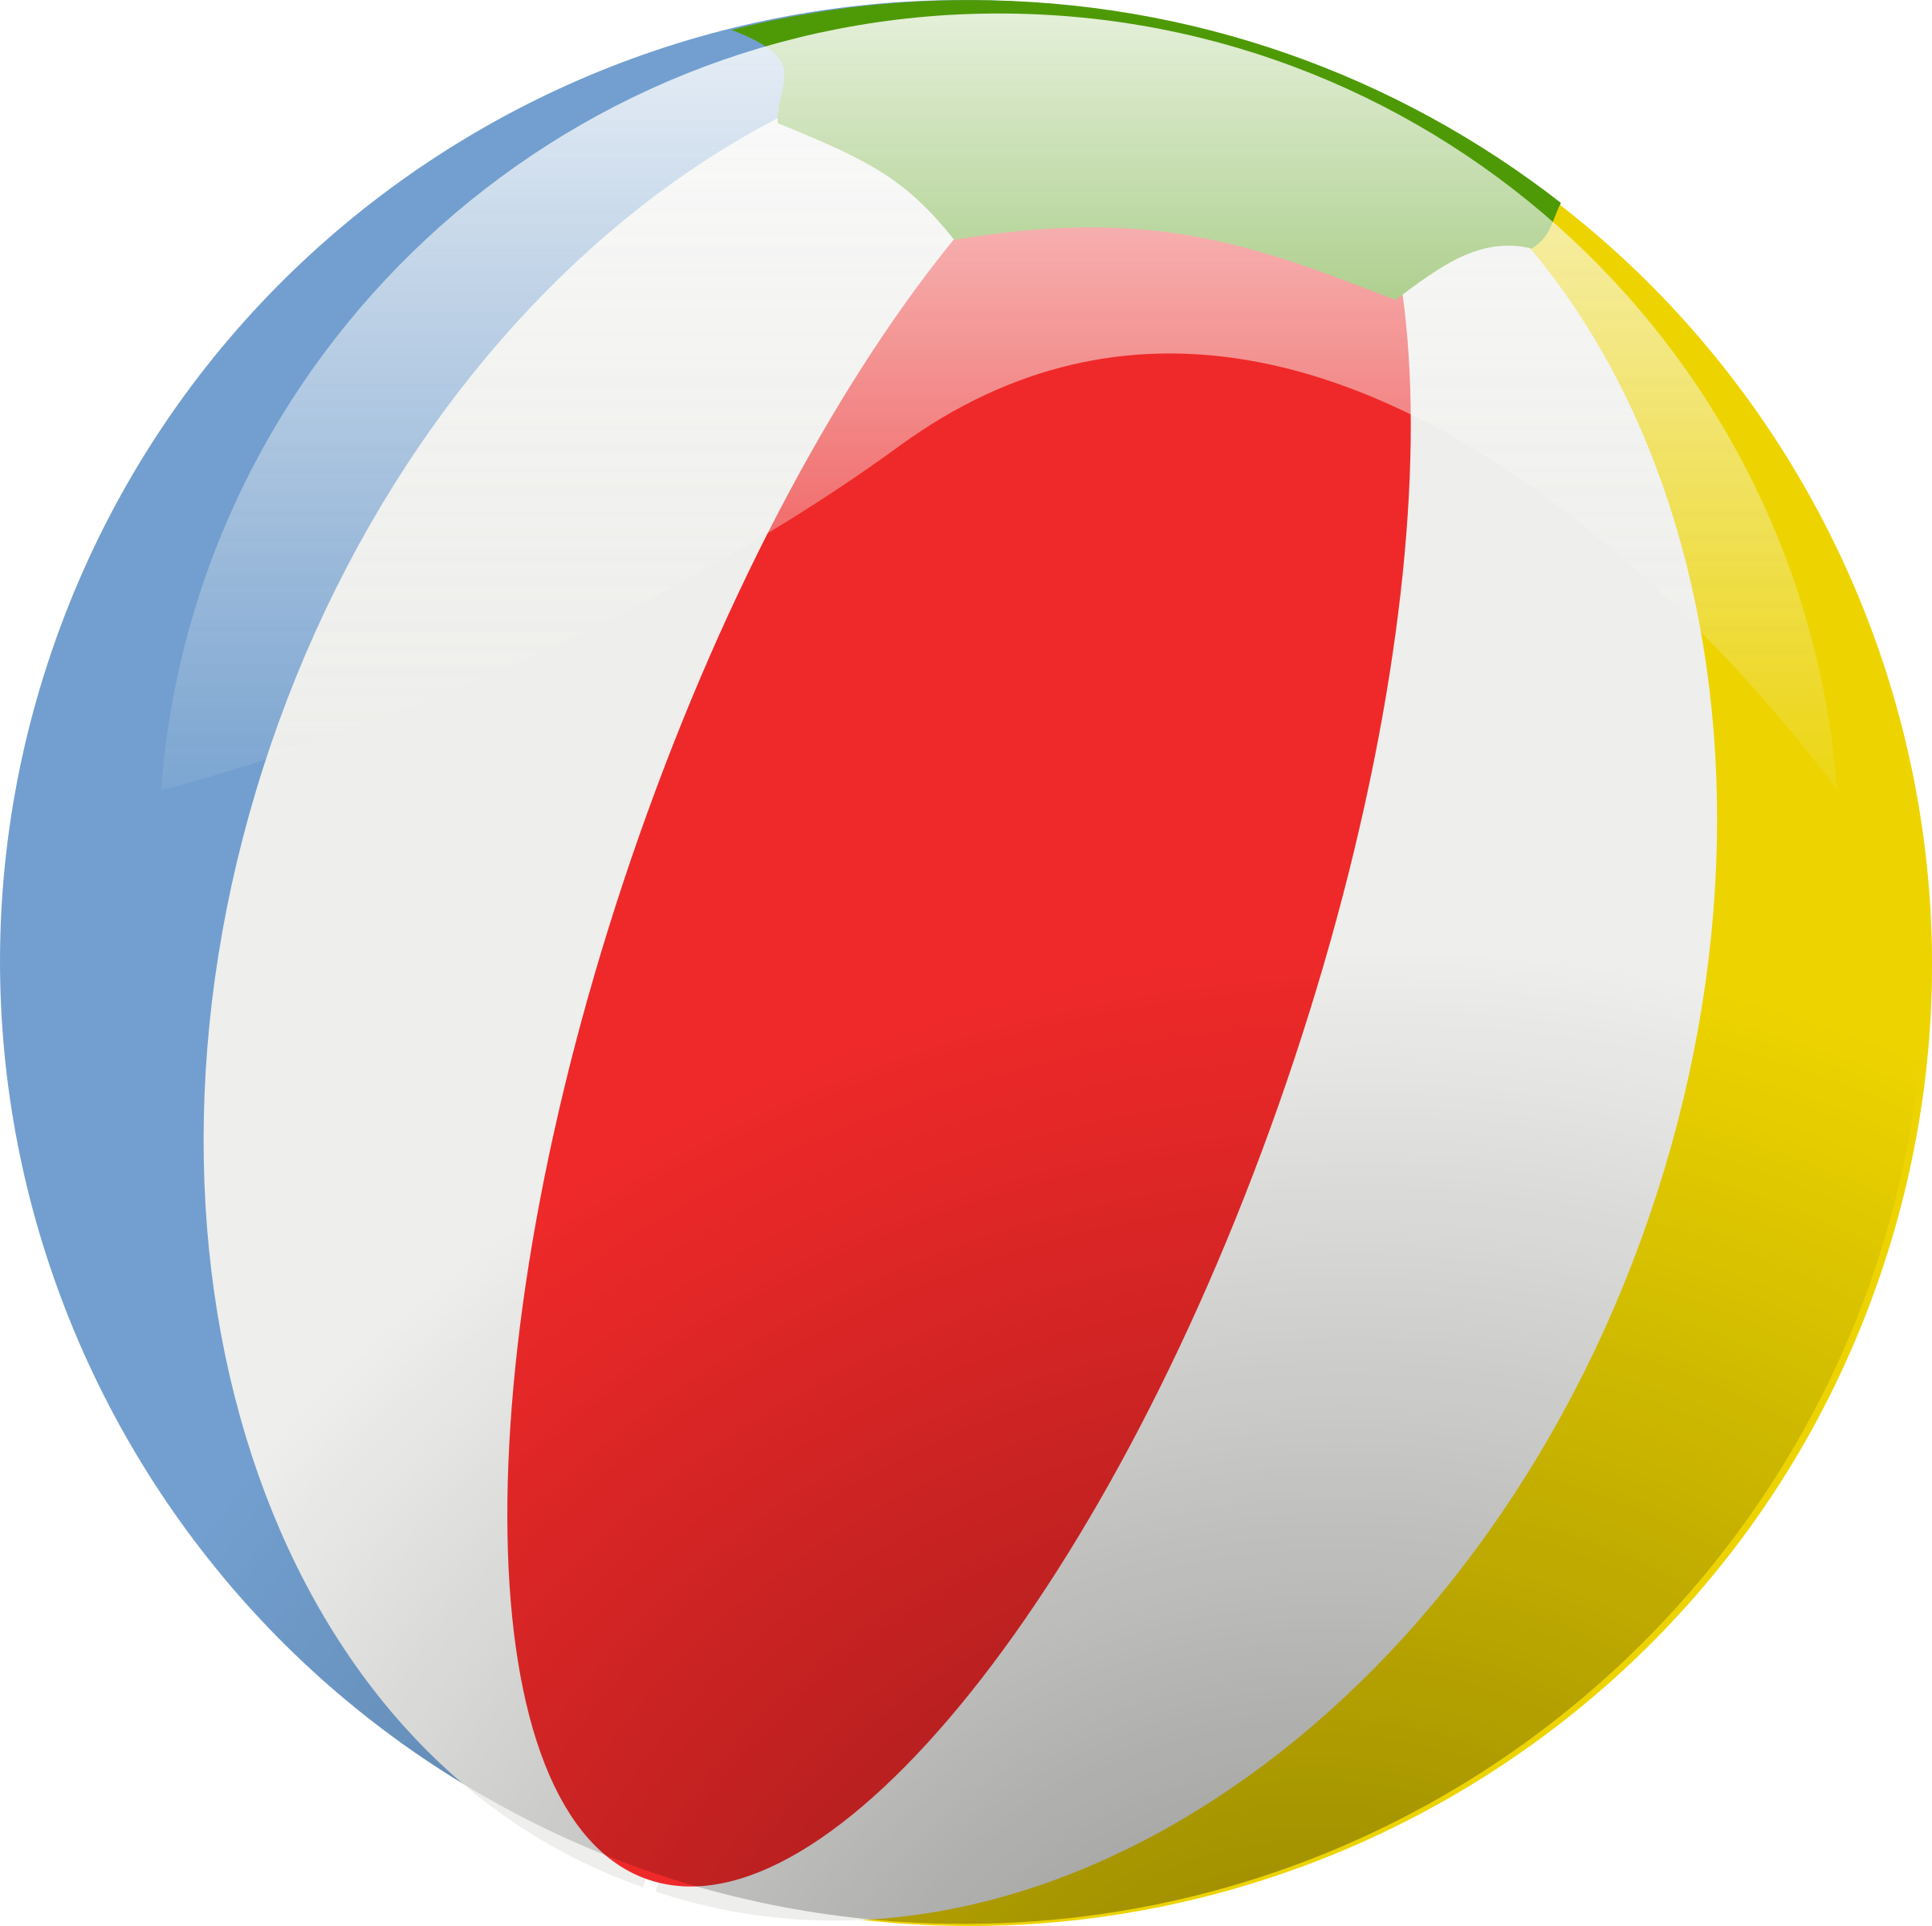 Free Beach Ball PNG Transparent Images, Download Free Beach Ball PNG